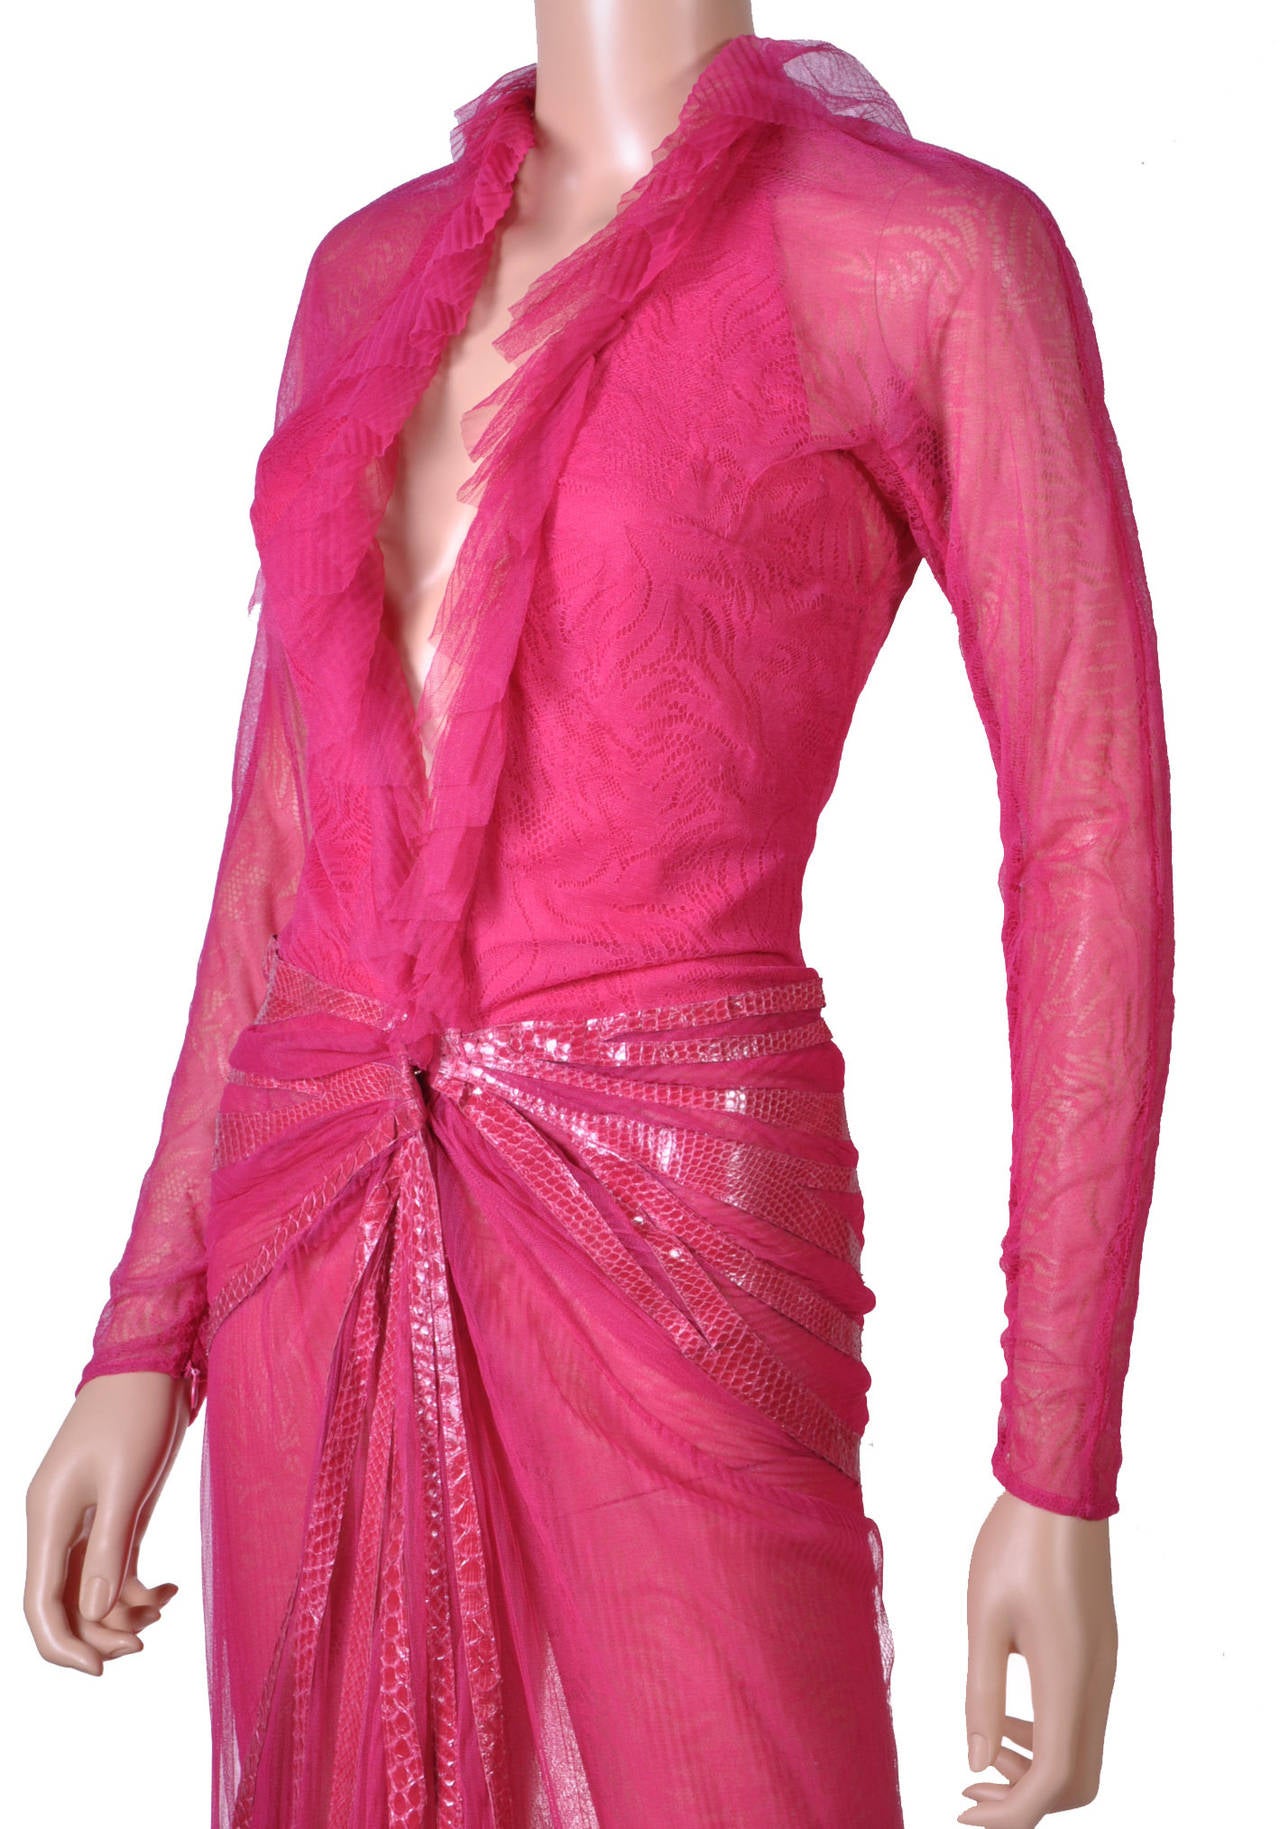 NEW and HIGHLY COLLECTIBLE VERSACE PINK LACE AND SNAKESKIN GOWN 1